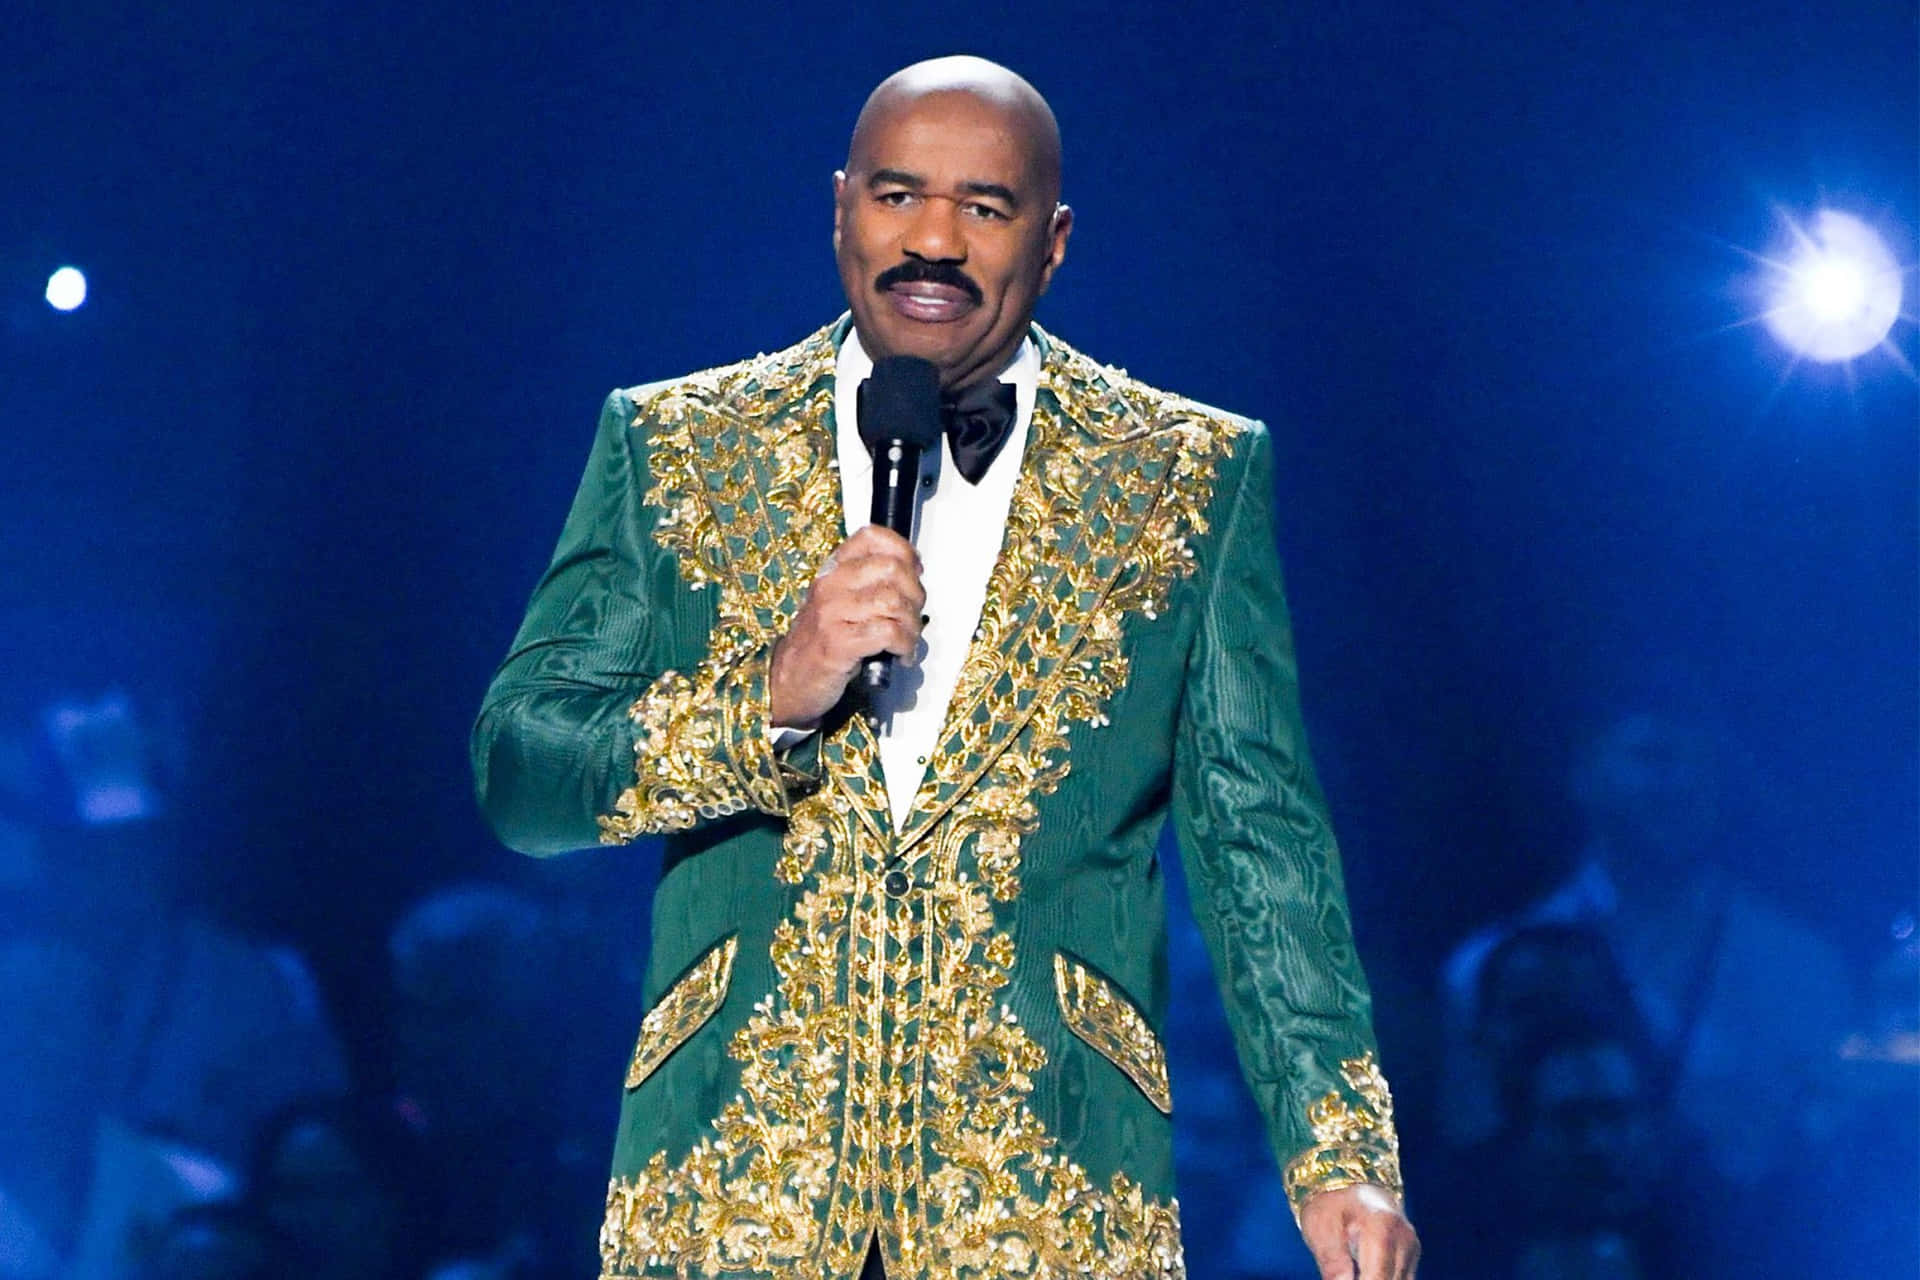 Steve Harvey Hosting In Green And Gold Suit Background